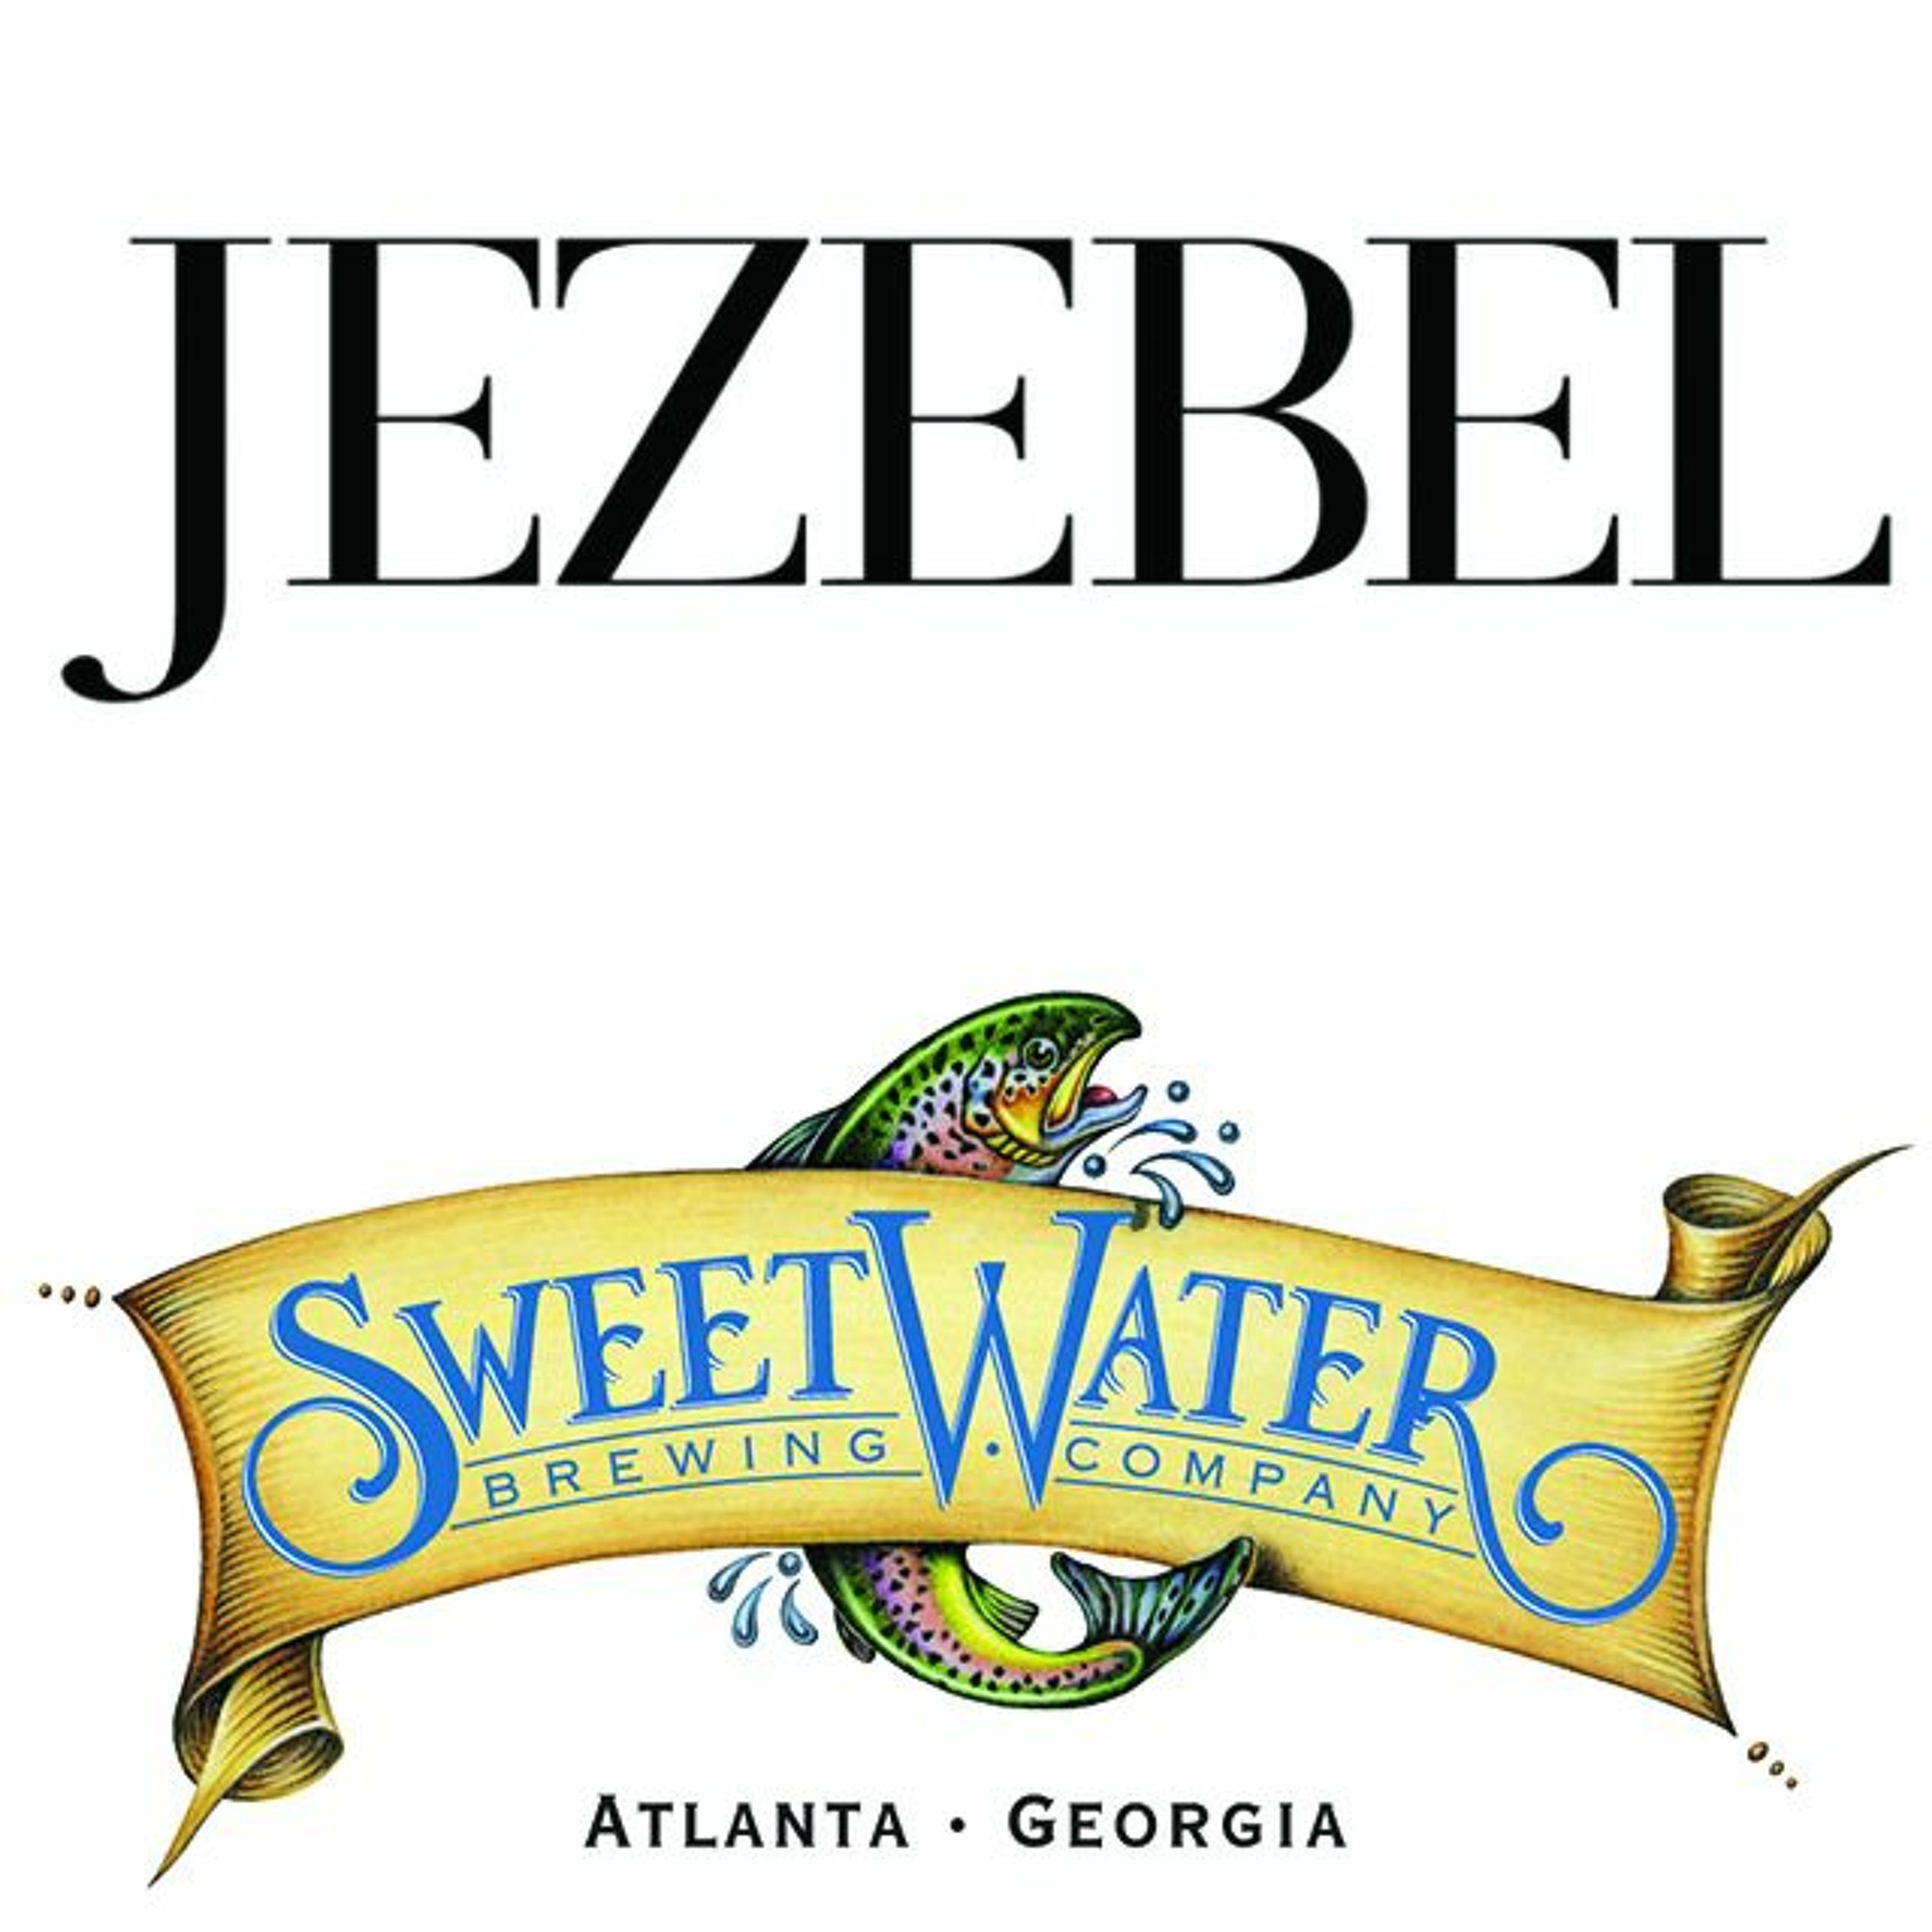 30A Show: Jezebel Magazine and Sweetwater Brewing Company